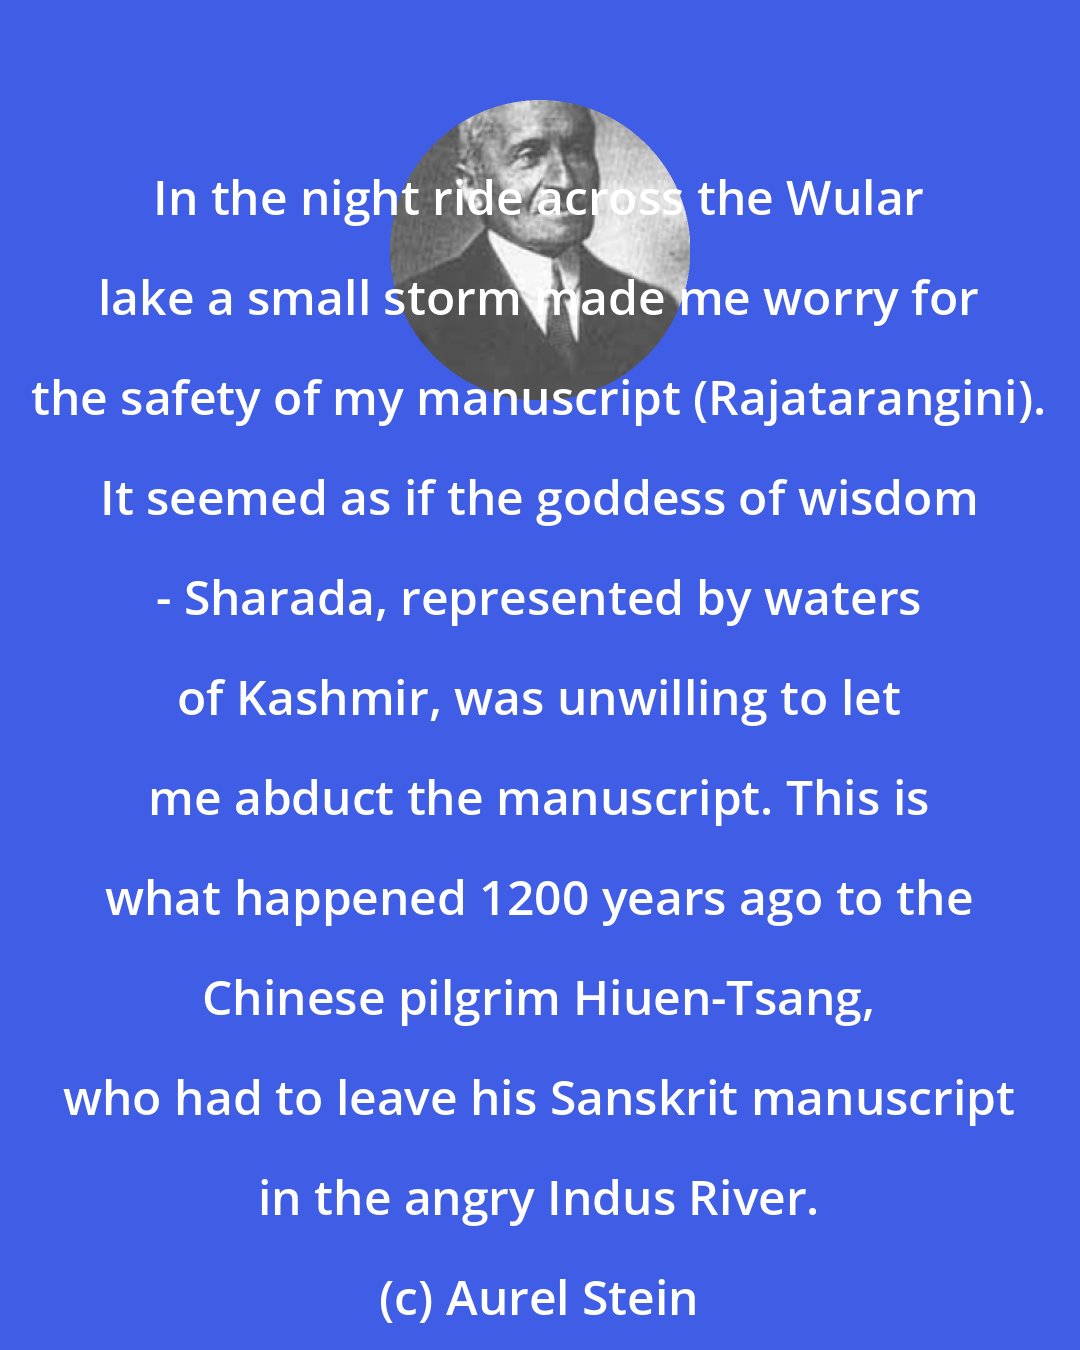 Aurel Stein: In the night ride across the Wular lake a small storm made me worry for the safety of my manuscript (Rajatarangini). It seemed as if the goddess of wisdom - Sharada, represented by waters of Kashmir, was unwilling to let me abduct the manuscript. This is what happened 1200 years ago to the Chinese pilgrim Hiuen-Tsang, who had to leave his Sanskrit manuscript in the angry Indus River.